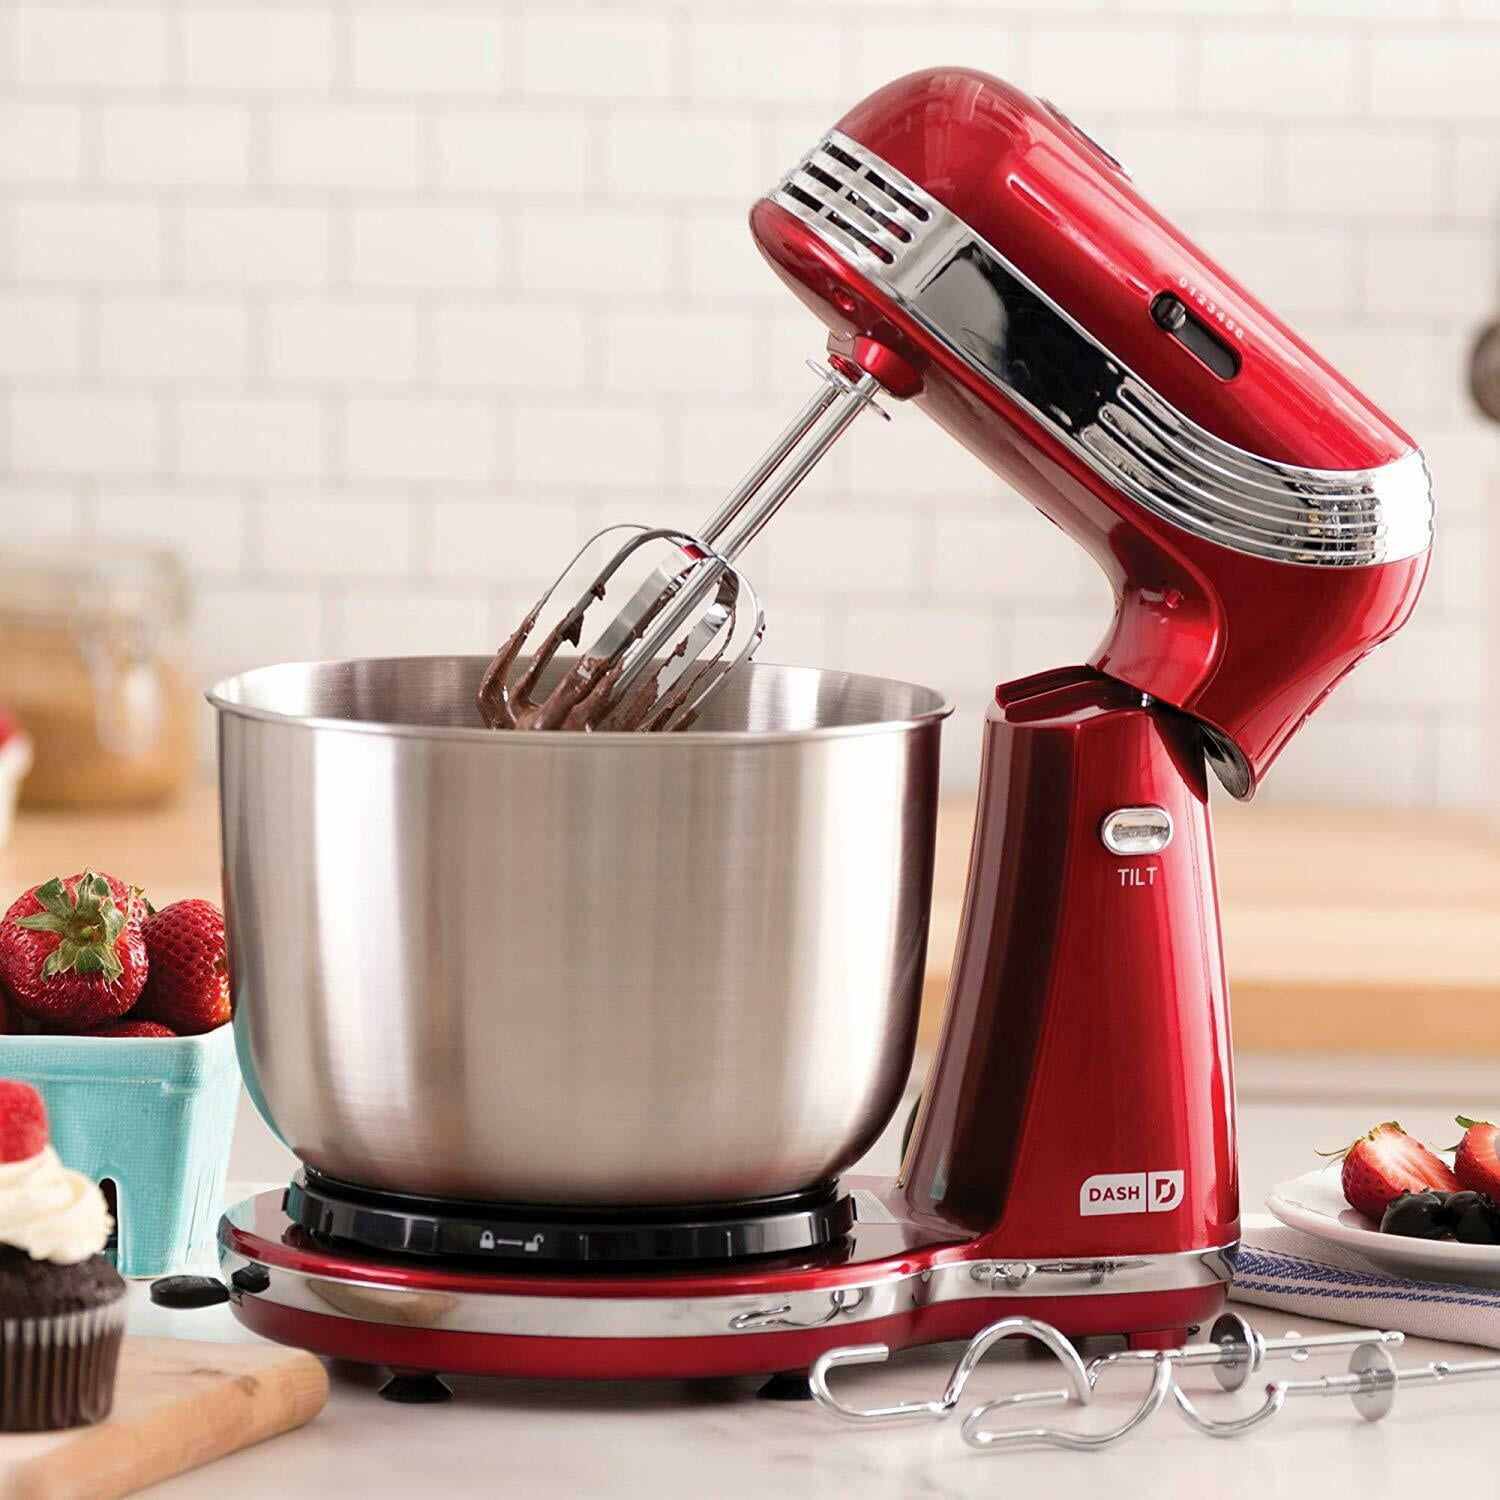 Details about   ELECTRIC STAND MIXER 6 SPEED KITCHEN MIX BEATER TILT HEAD STAINLESS STEEL BOWL 